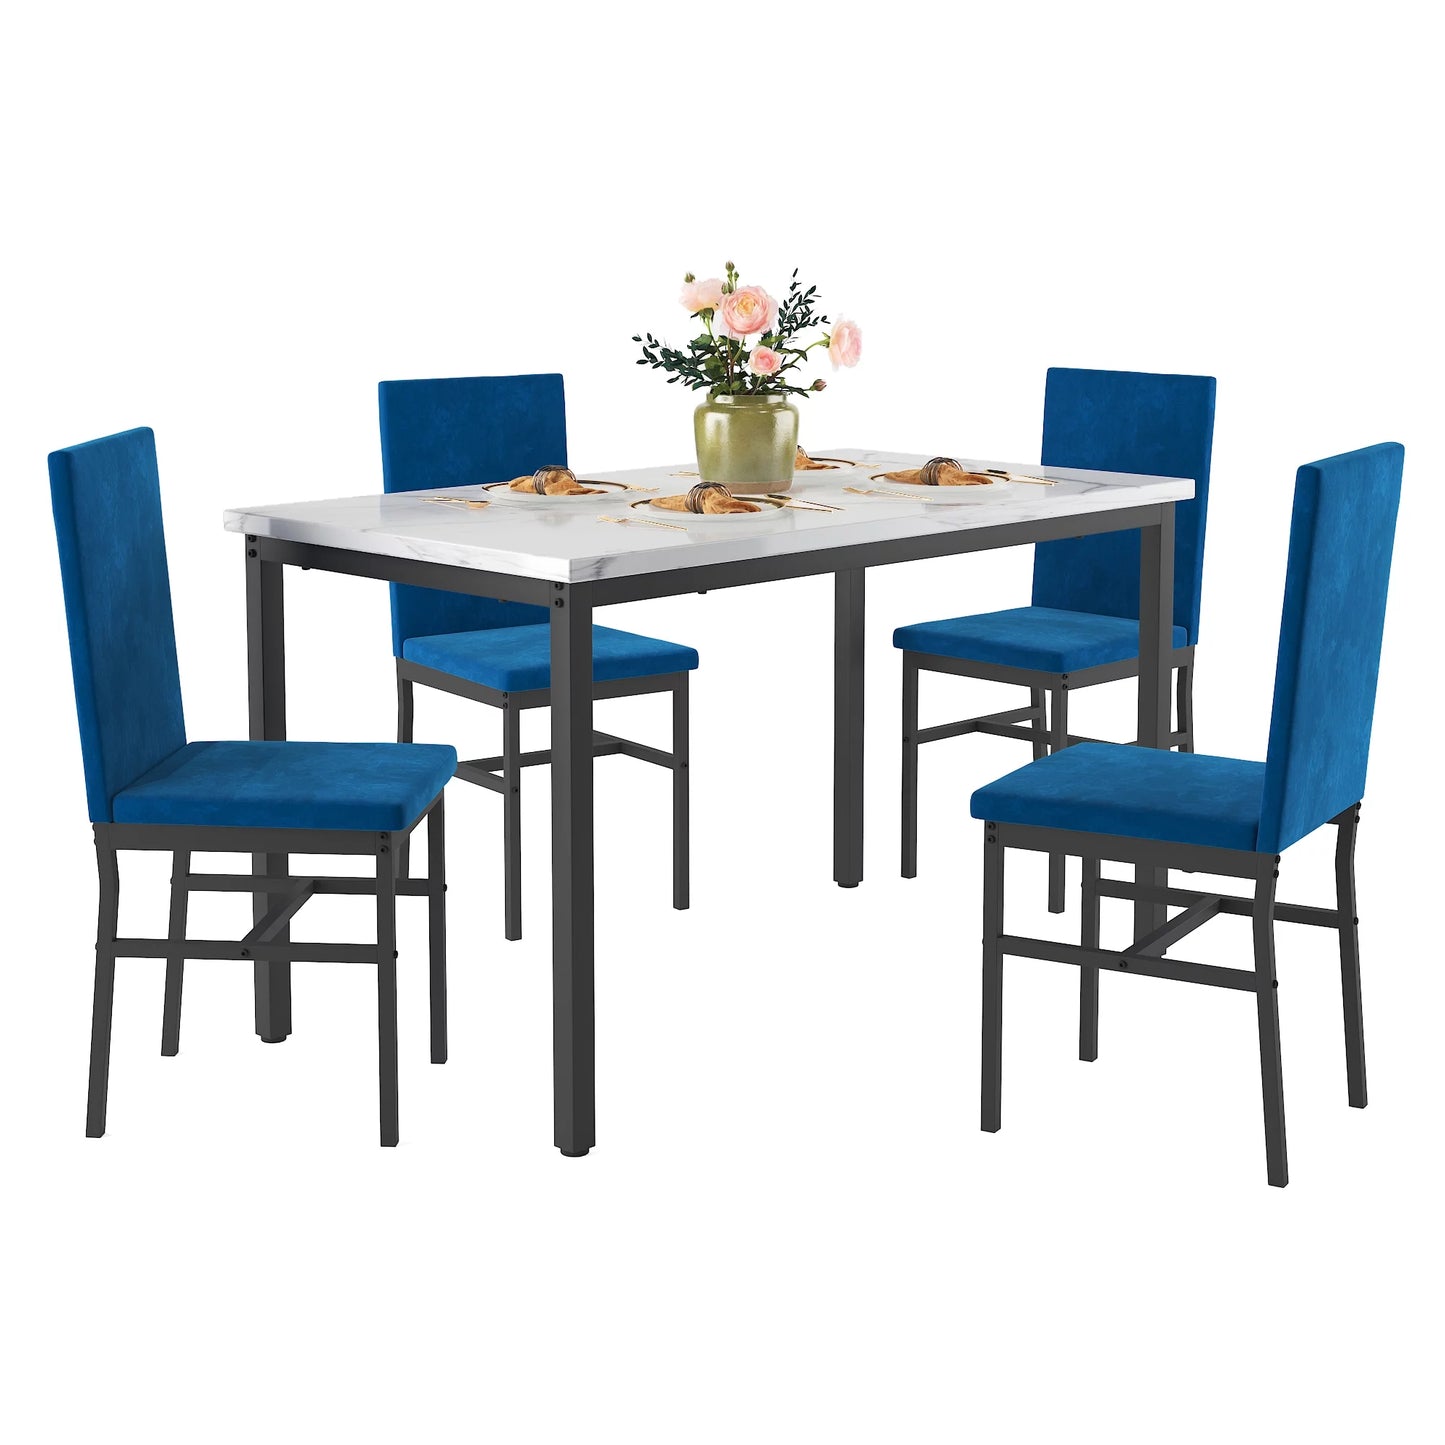 5 Piece Dining Table Set, Modern Faux Marble Tabletop and 4 PU Leather Upholstered Chairs, Rectangle Kitchen Table and Chairs for 4 Persons, Small Dining Set for Bar Dining Room Breakfast Nook